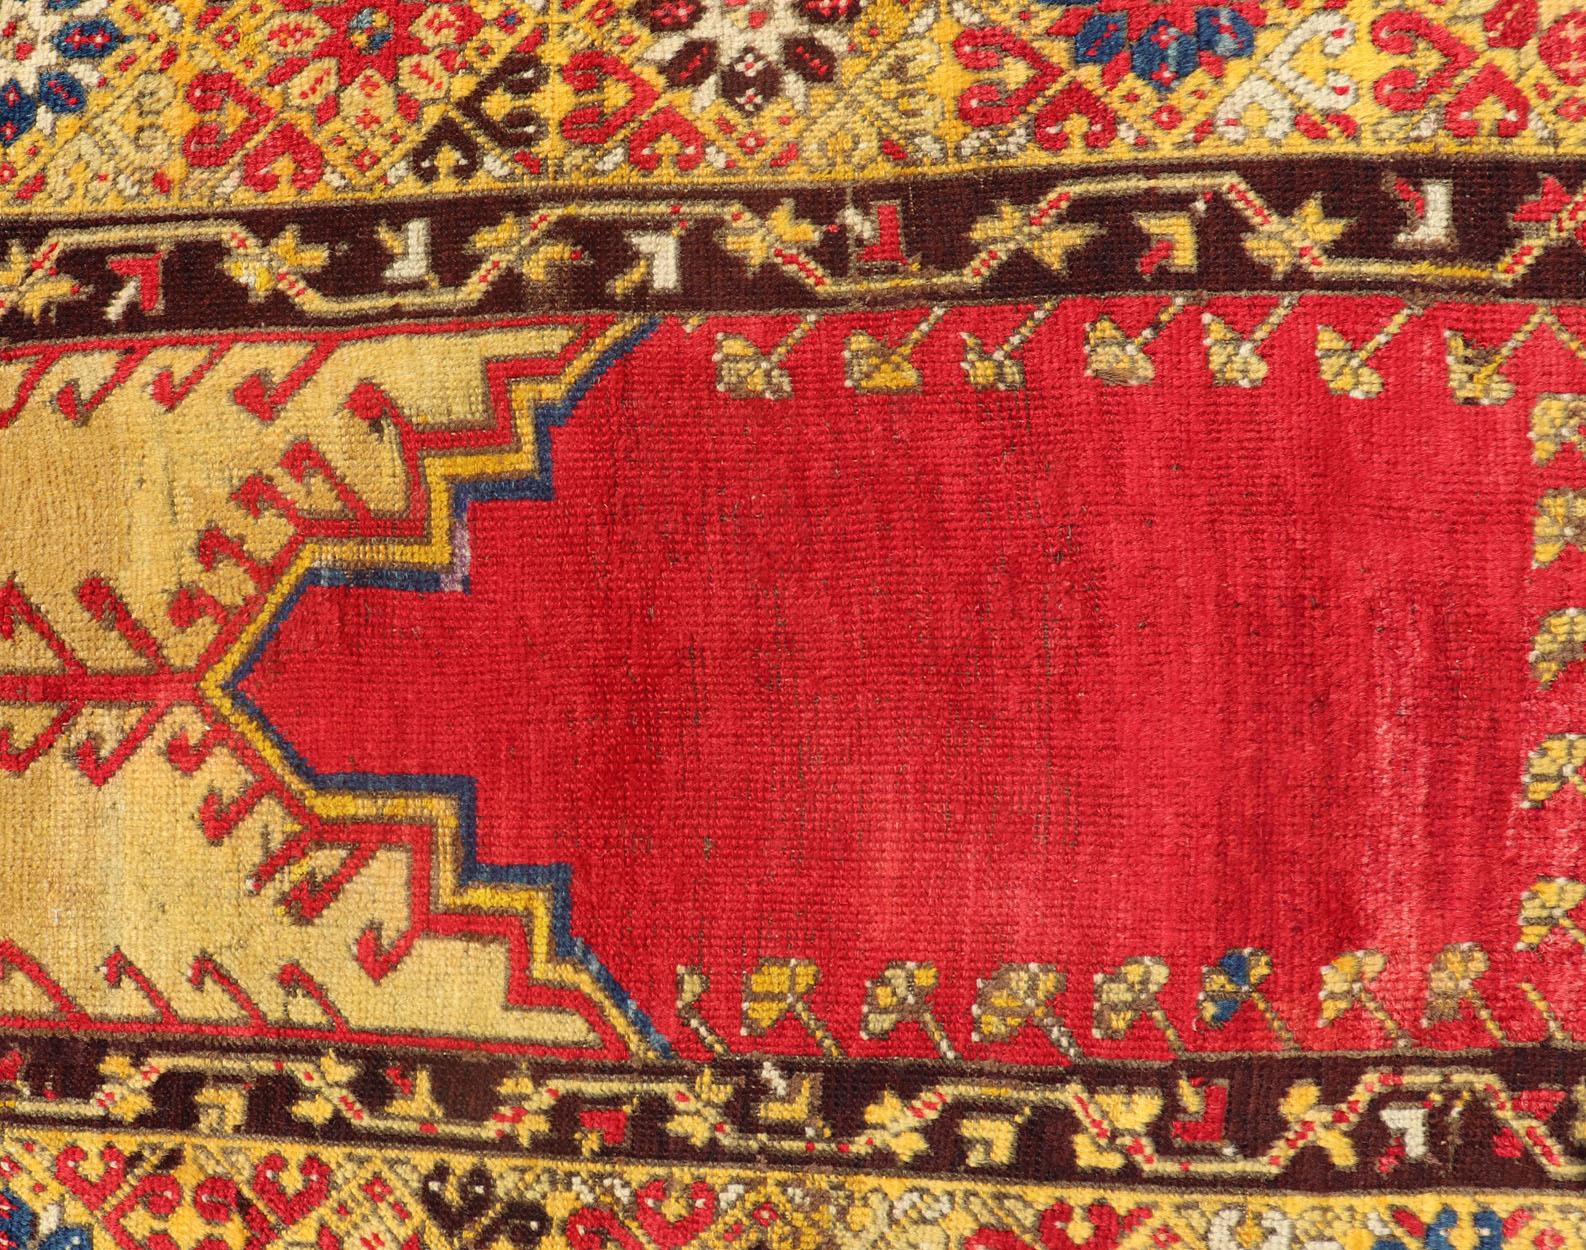 Antique Turkish Prayer Rug in Vibrant Saffron Yellow, Gold, Red and Blue For Sale 4